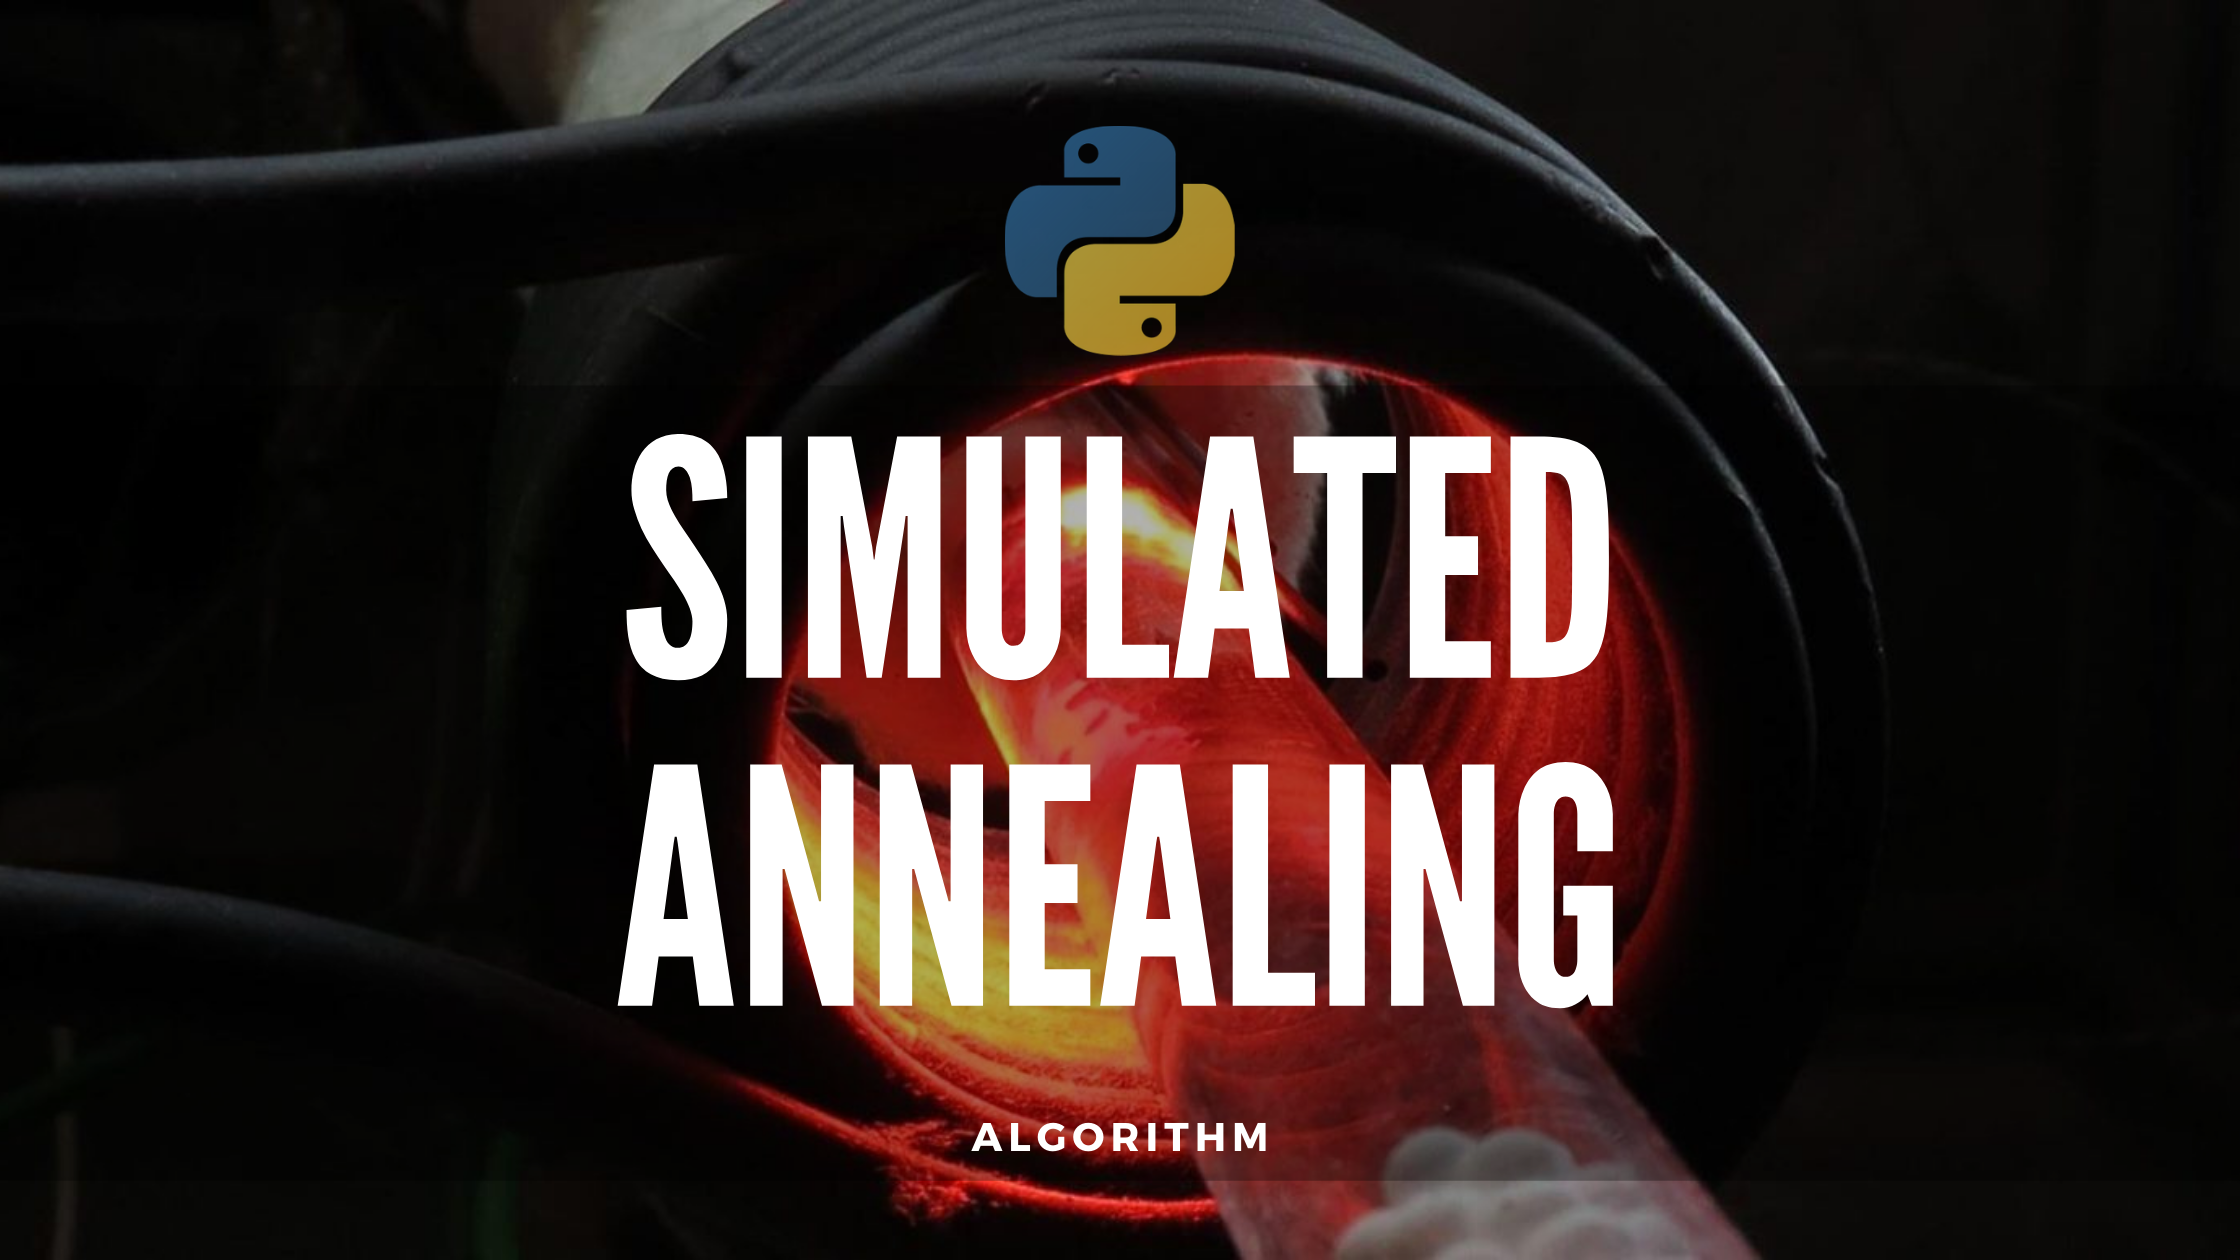 how-to-implement-simulated-annealing-algorithm-in-python-by-cesar-william-alvarenga-the